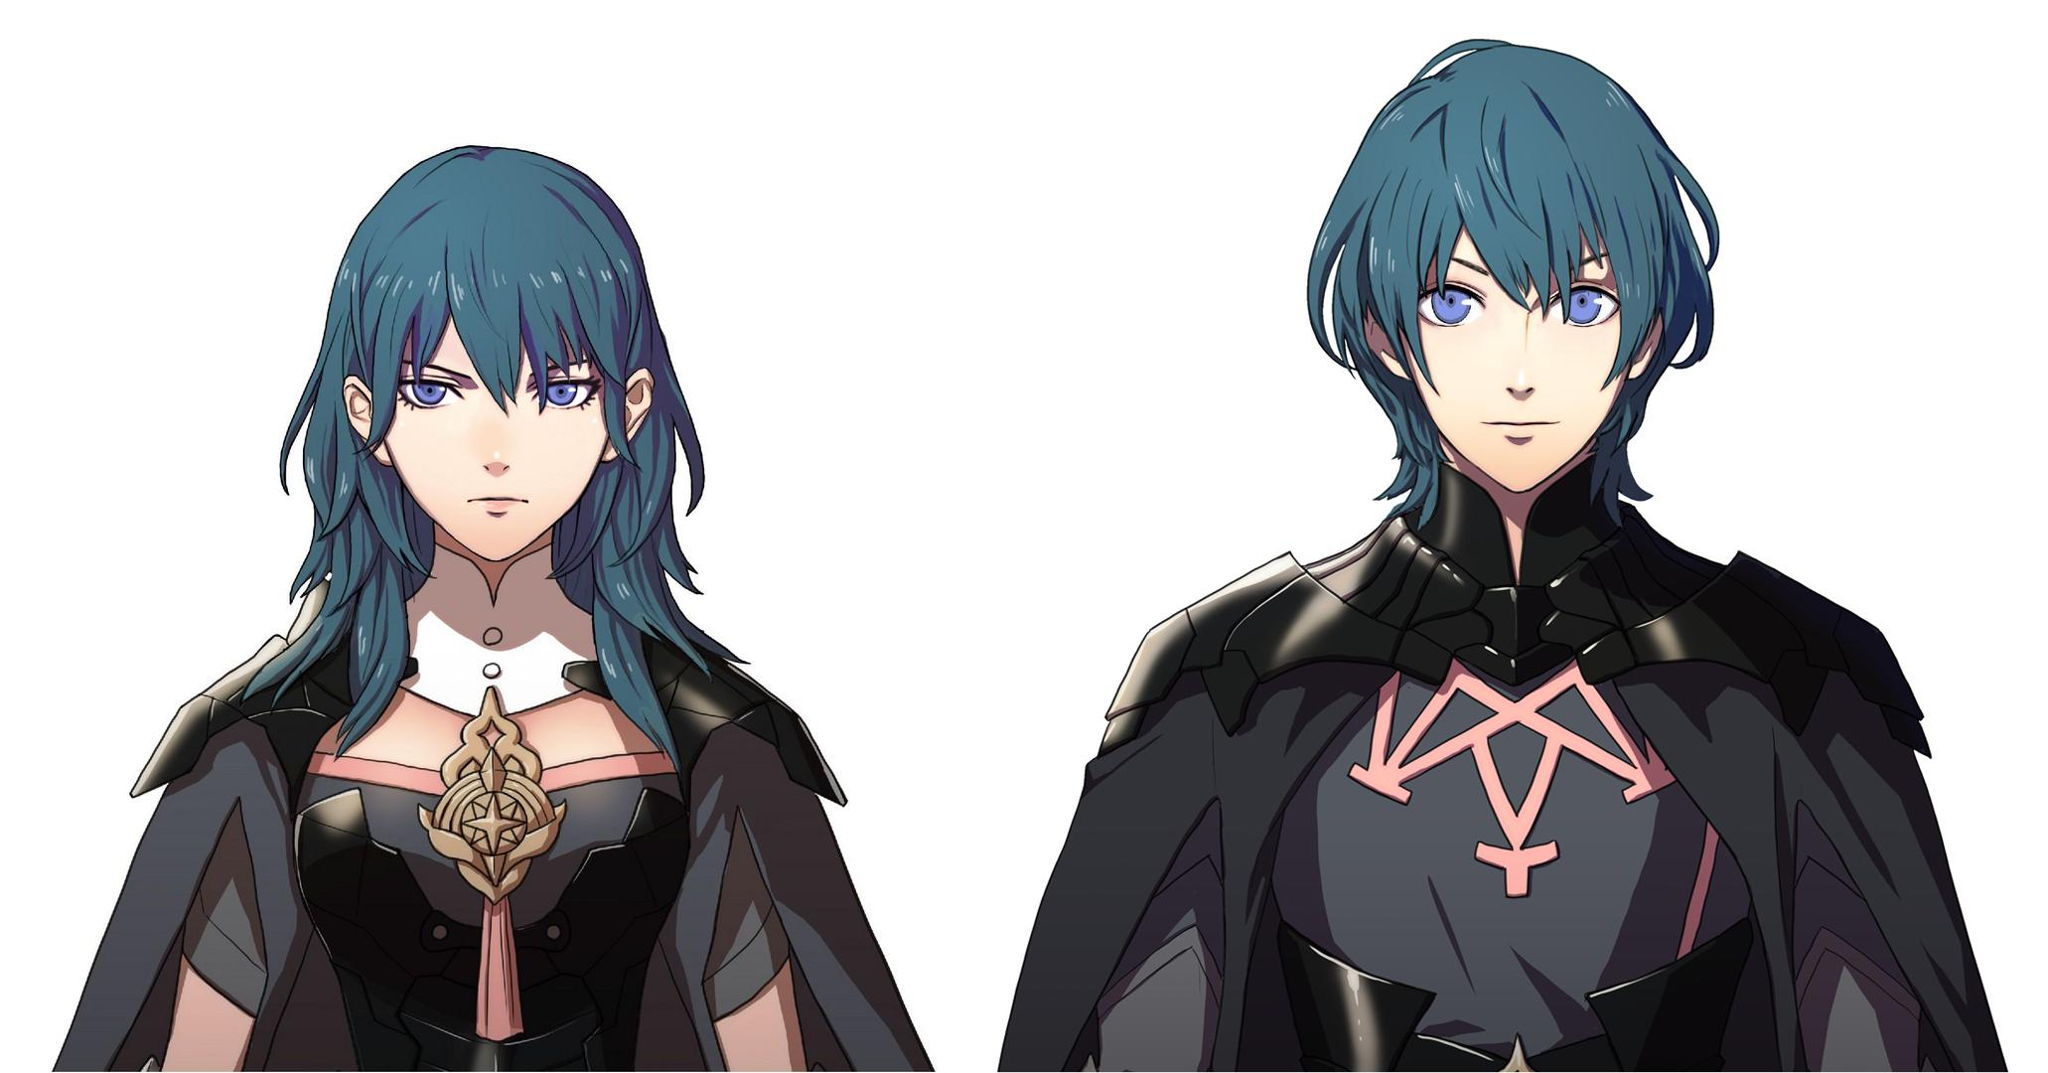 Female and Male Byleth, both are wearing their typical black robes, have dark teal hair, and are against a white background.